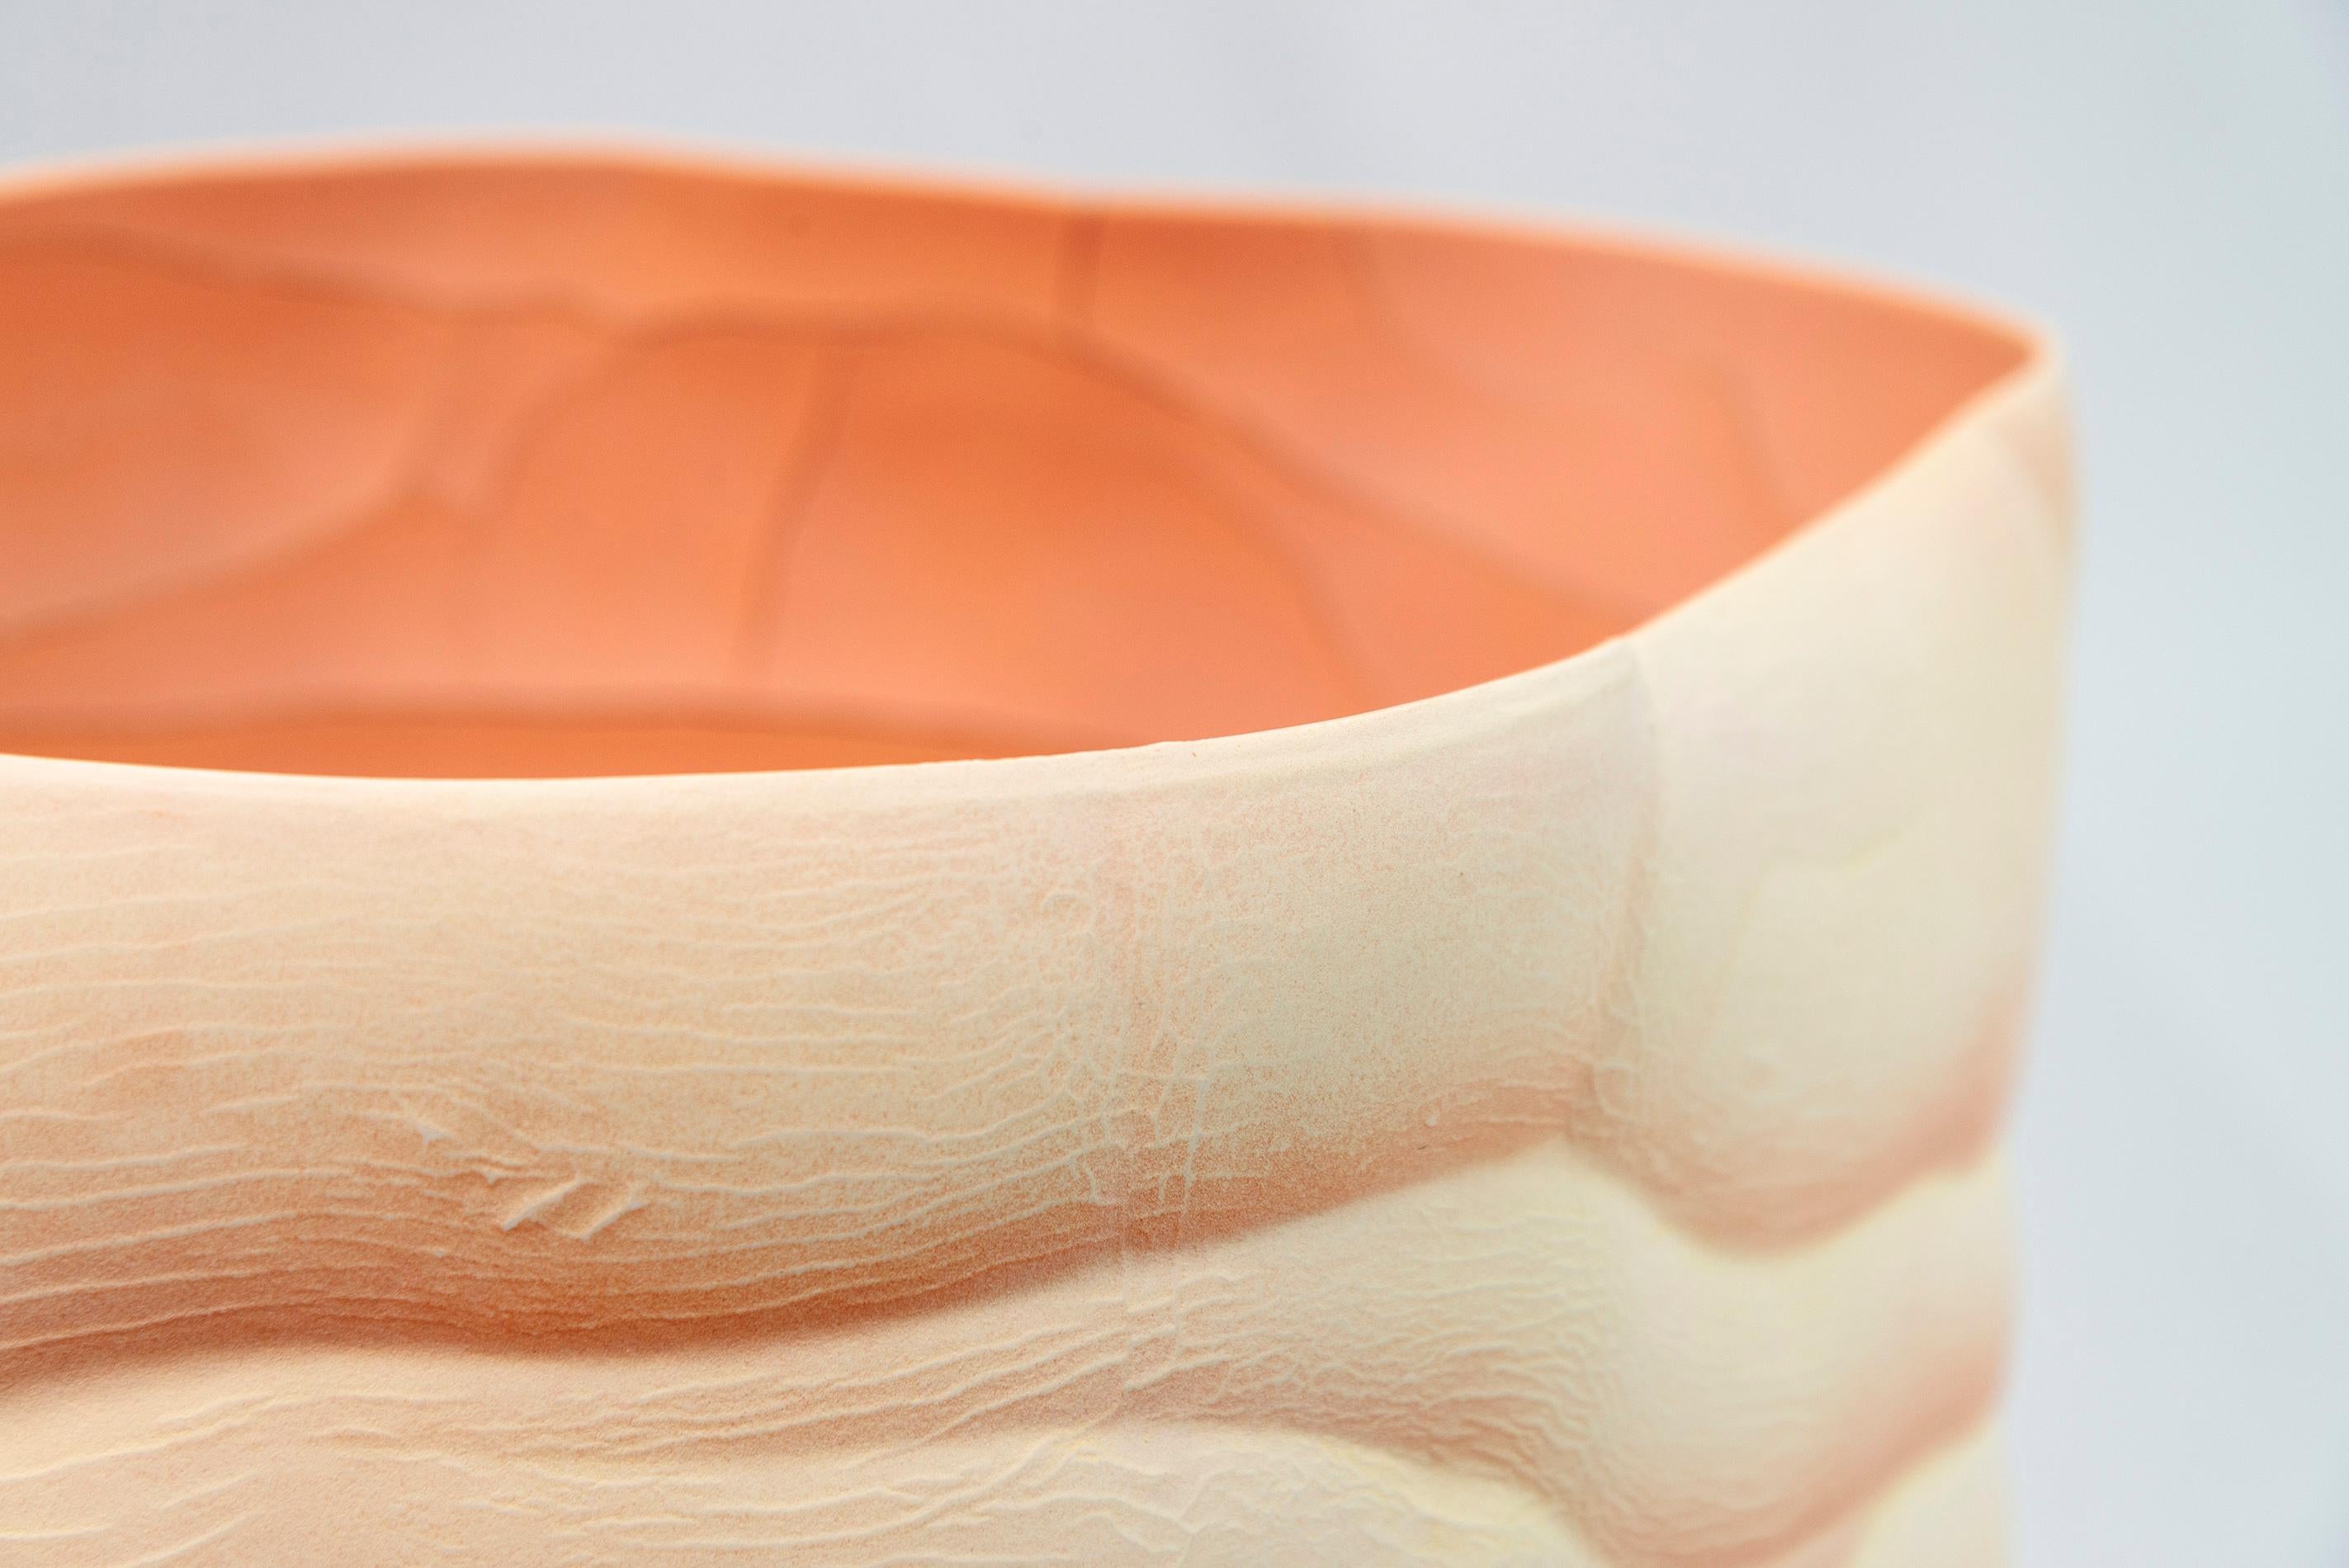 In her lakeside studio surrounded by nature, Paula Murray creates uniquely beautiful porcelain pieces. This vessel has a tall undulating form accentuated by waves of lines that run both outside and inside. The colour is extraordinary—a rich saffron